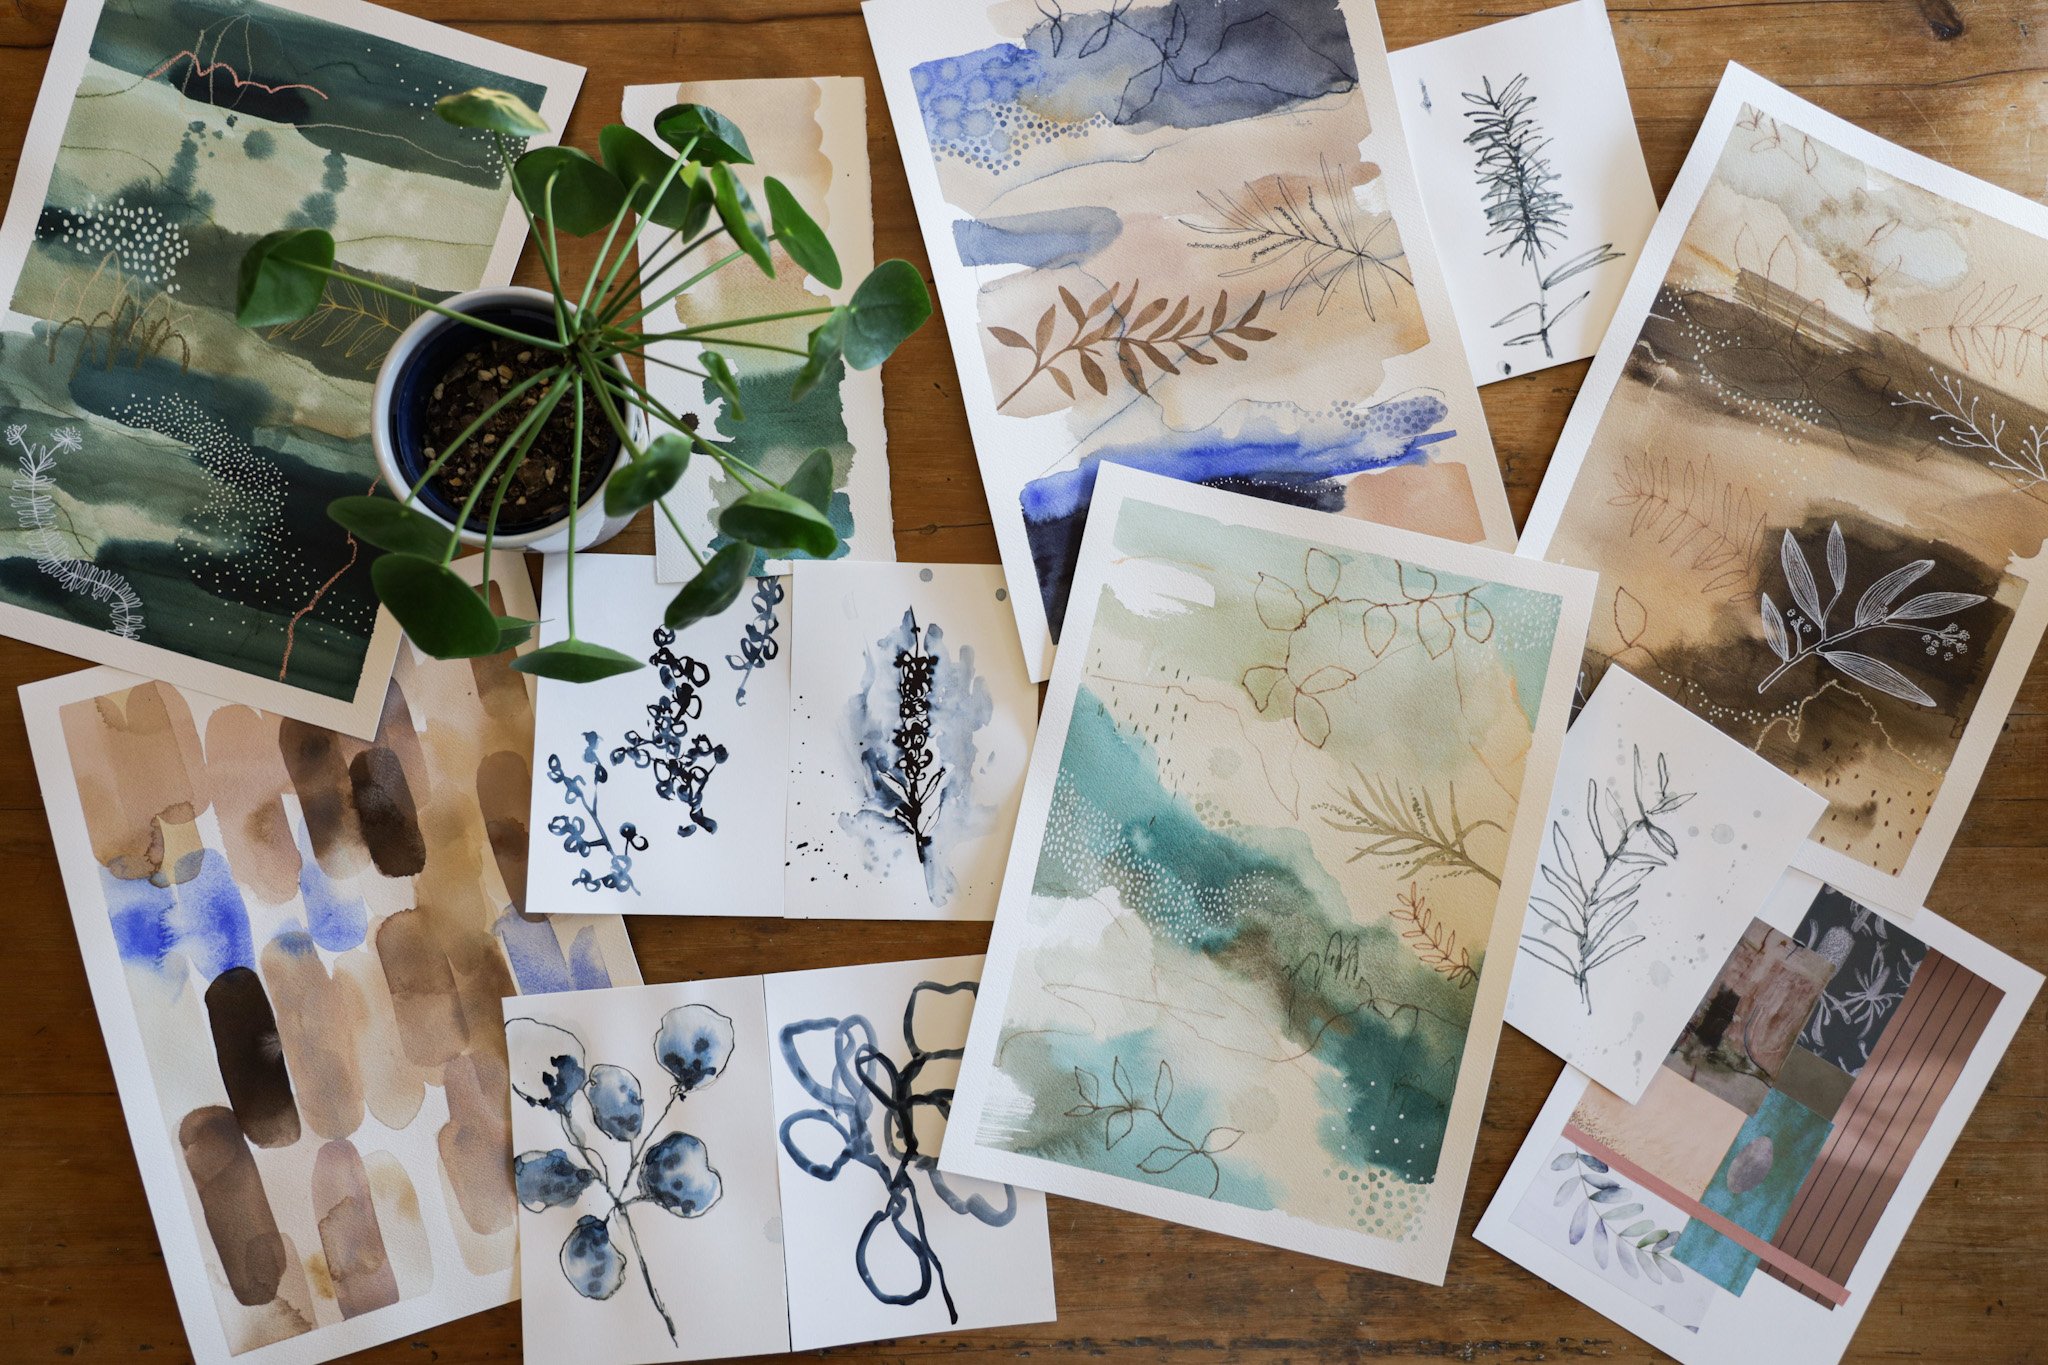  Bird’s eye view of finished botanical paintings on wooden table.  